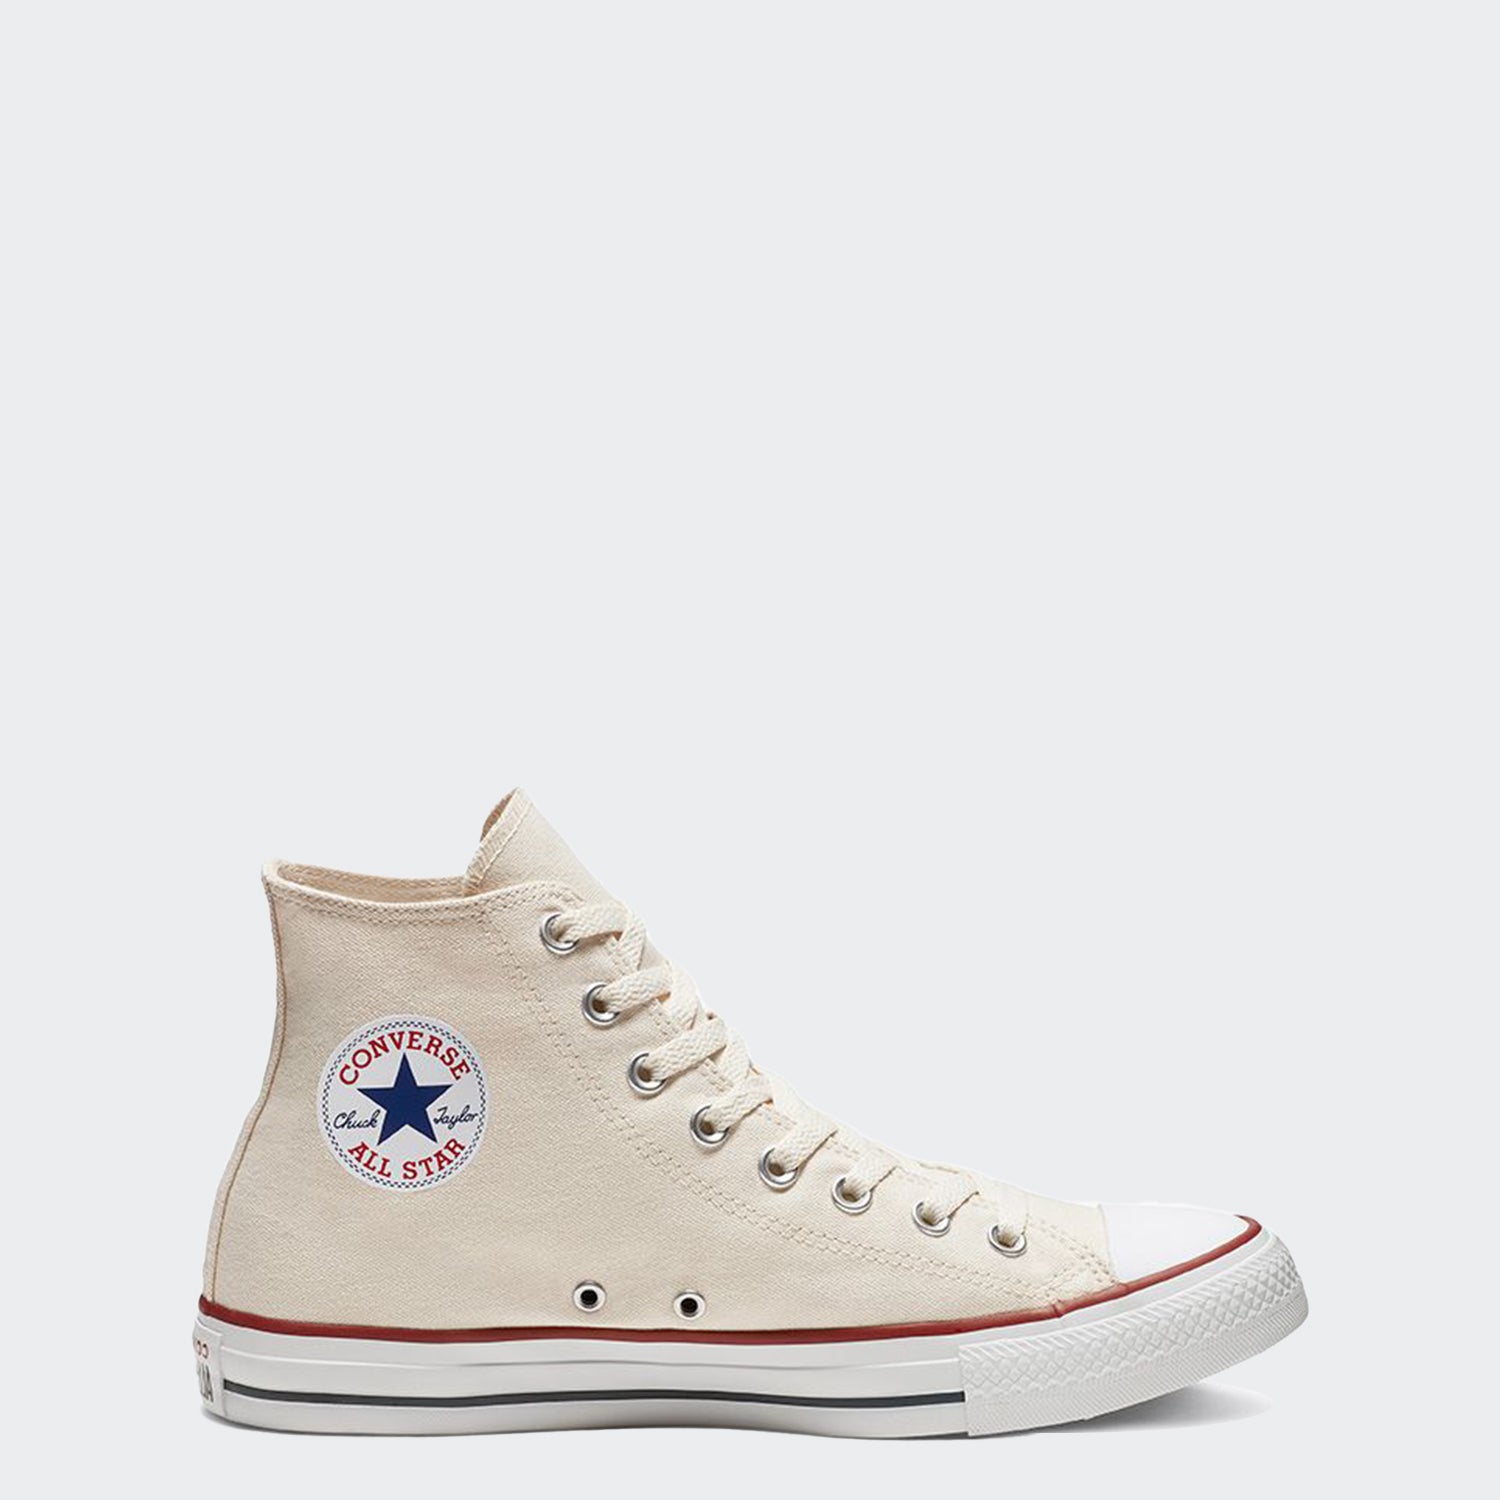 Converse Chuck Taylor All Star Shoes Ivory | Chicago Sports